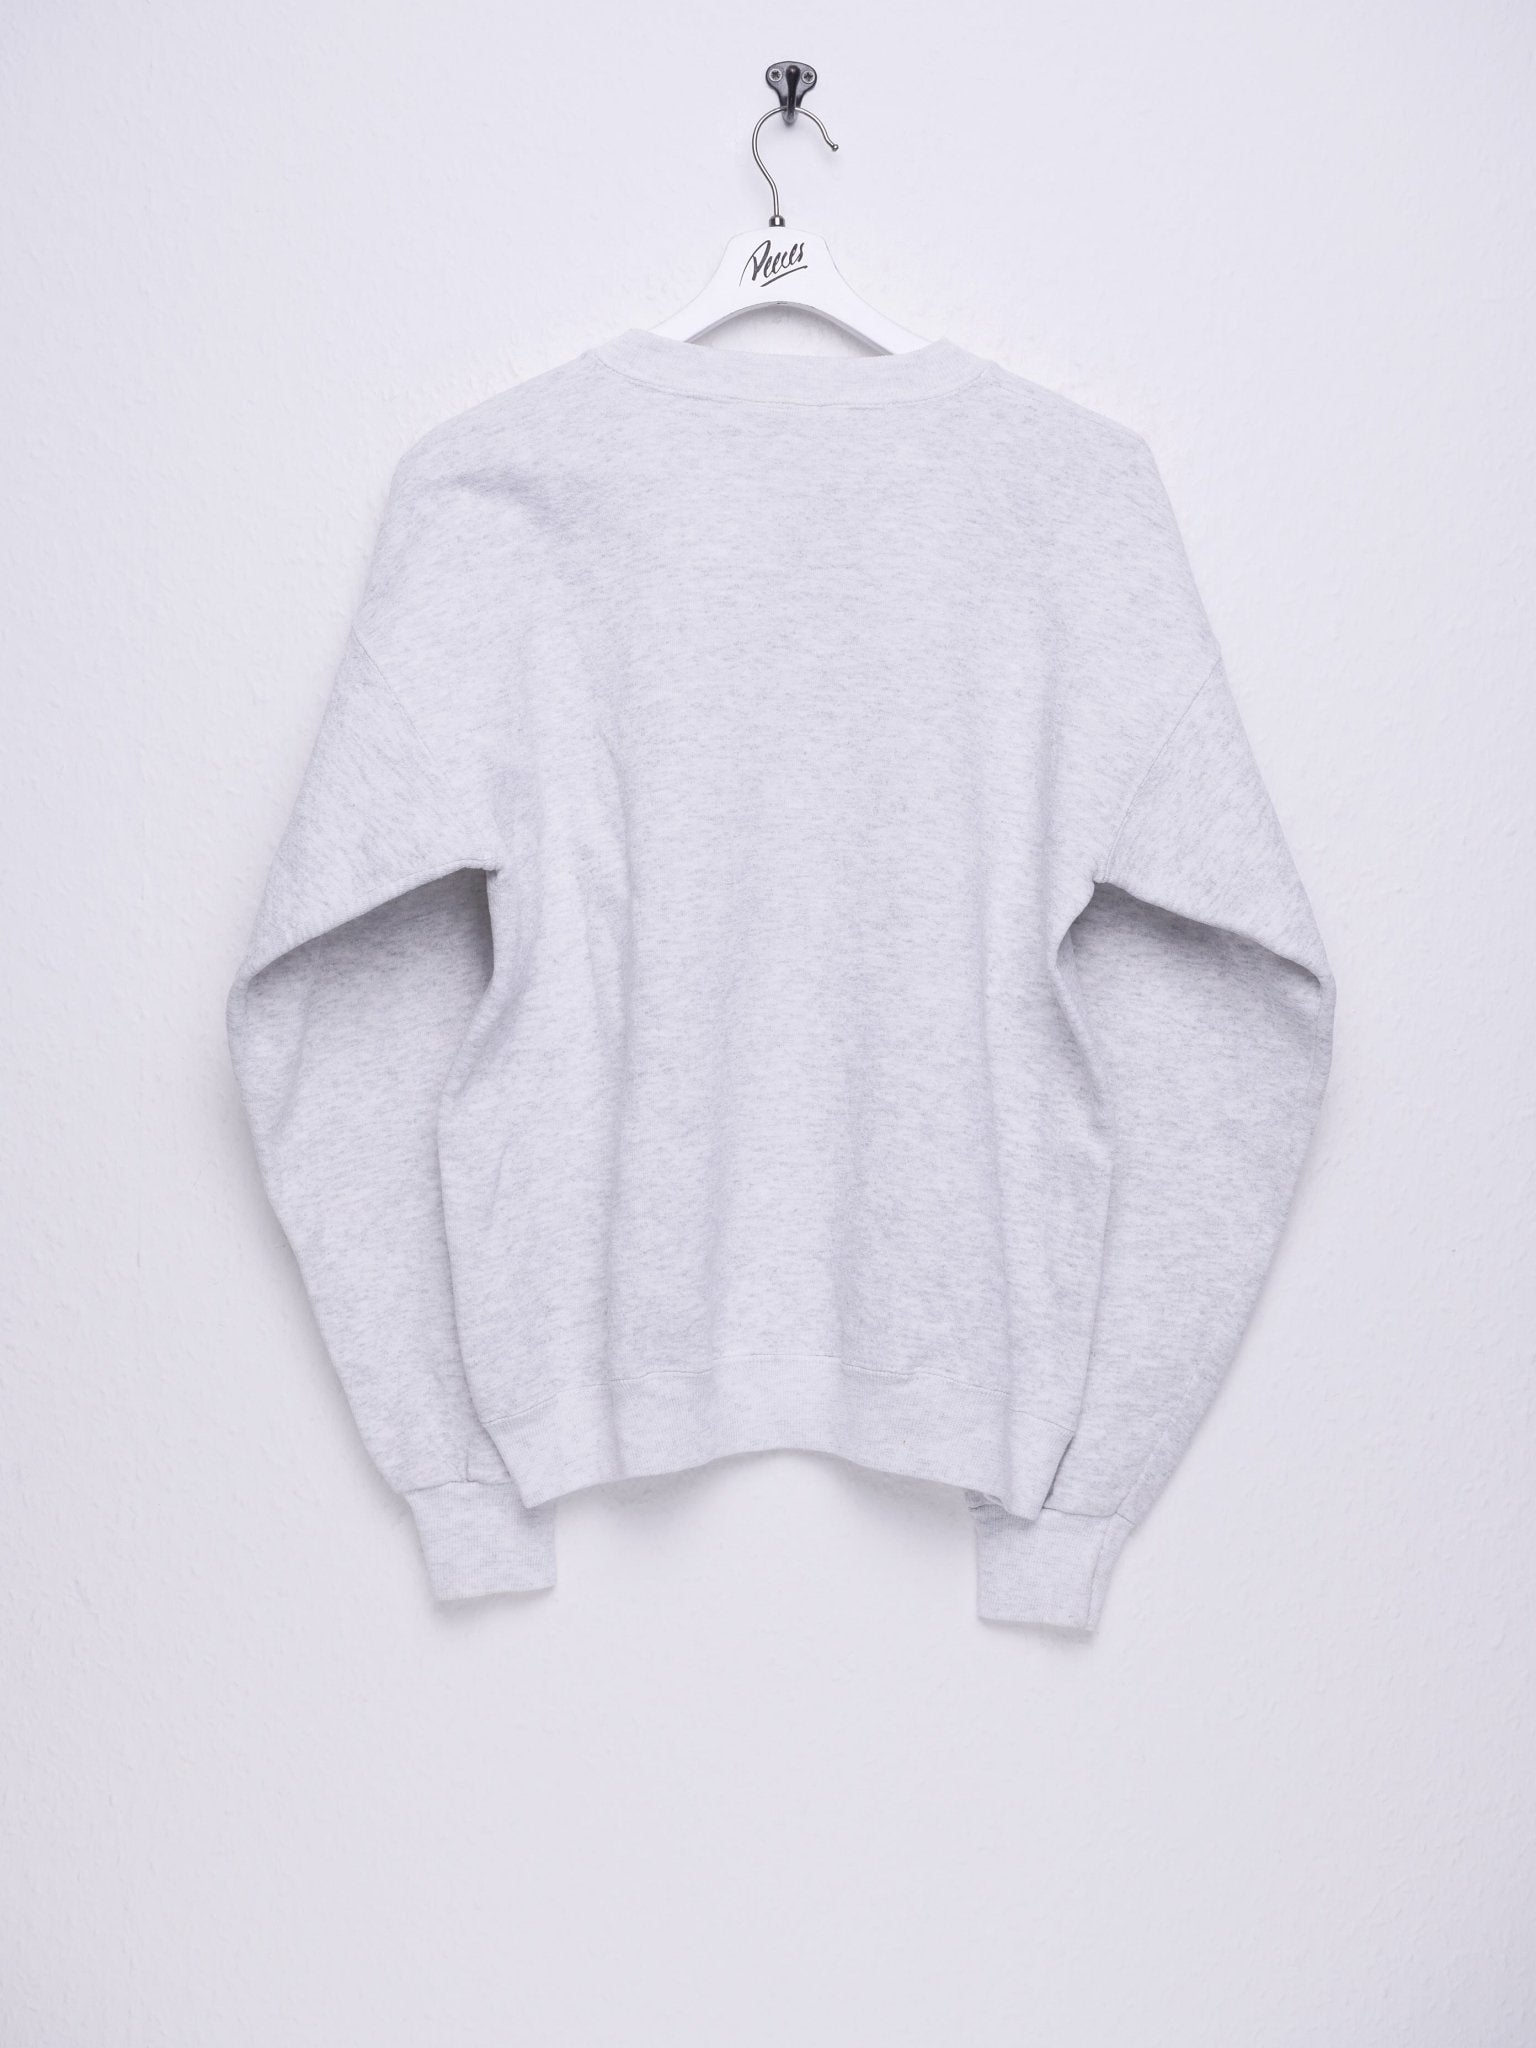 Lee printed Spellout boxy grey Sweater - Peeces